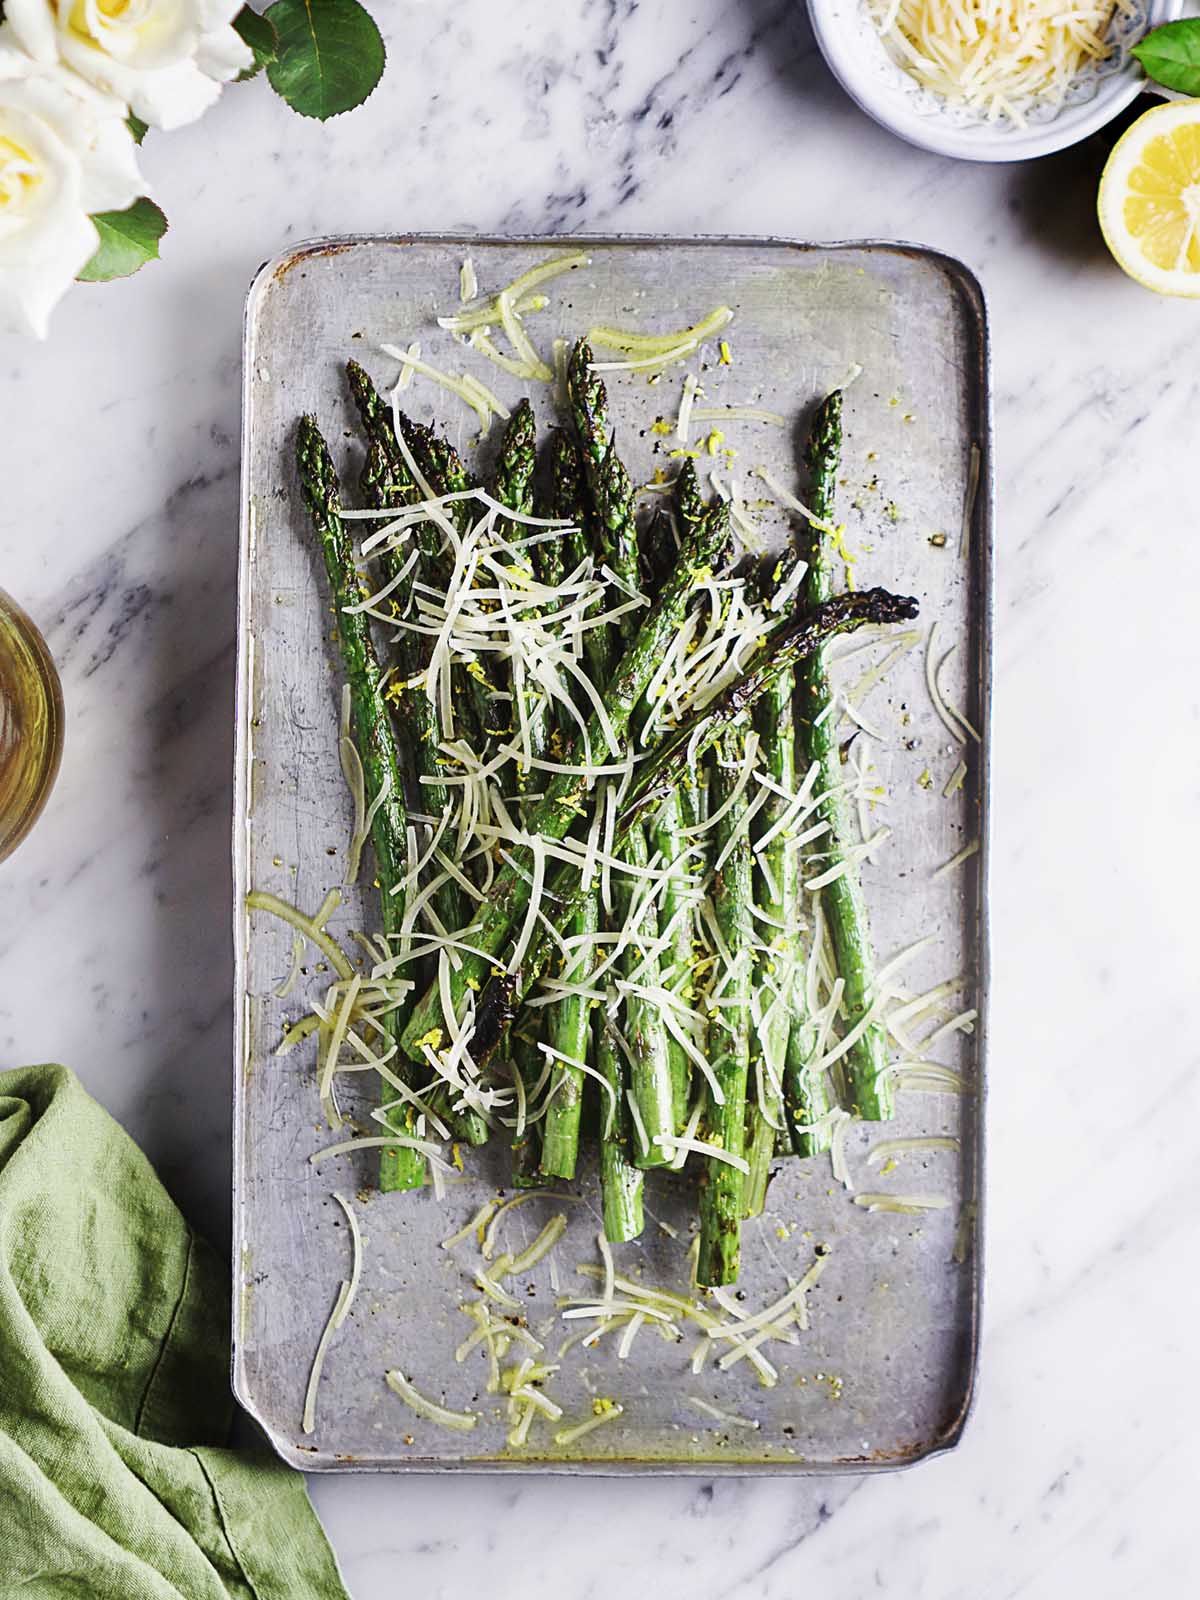 Asparagus placed on a metal tray sprinkled with shredded parmesan cheese.